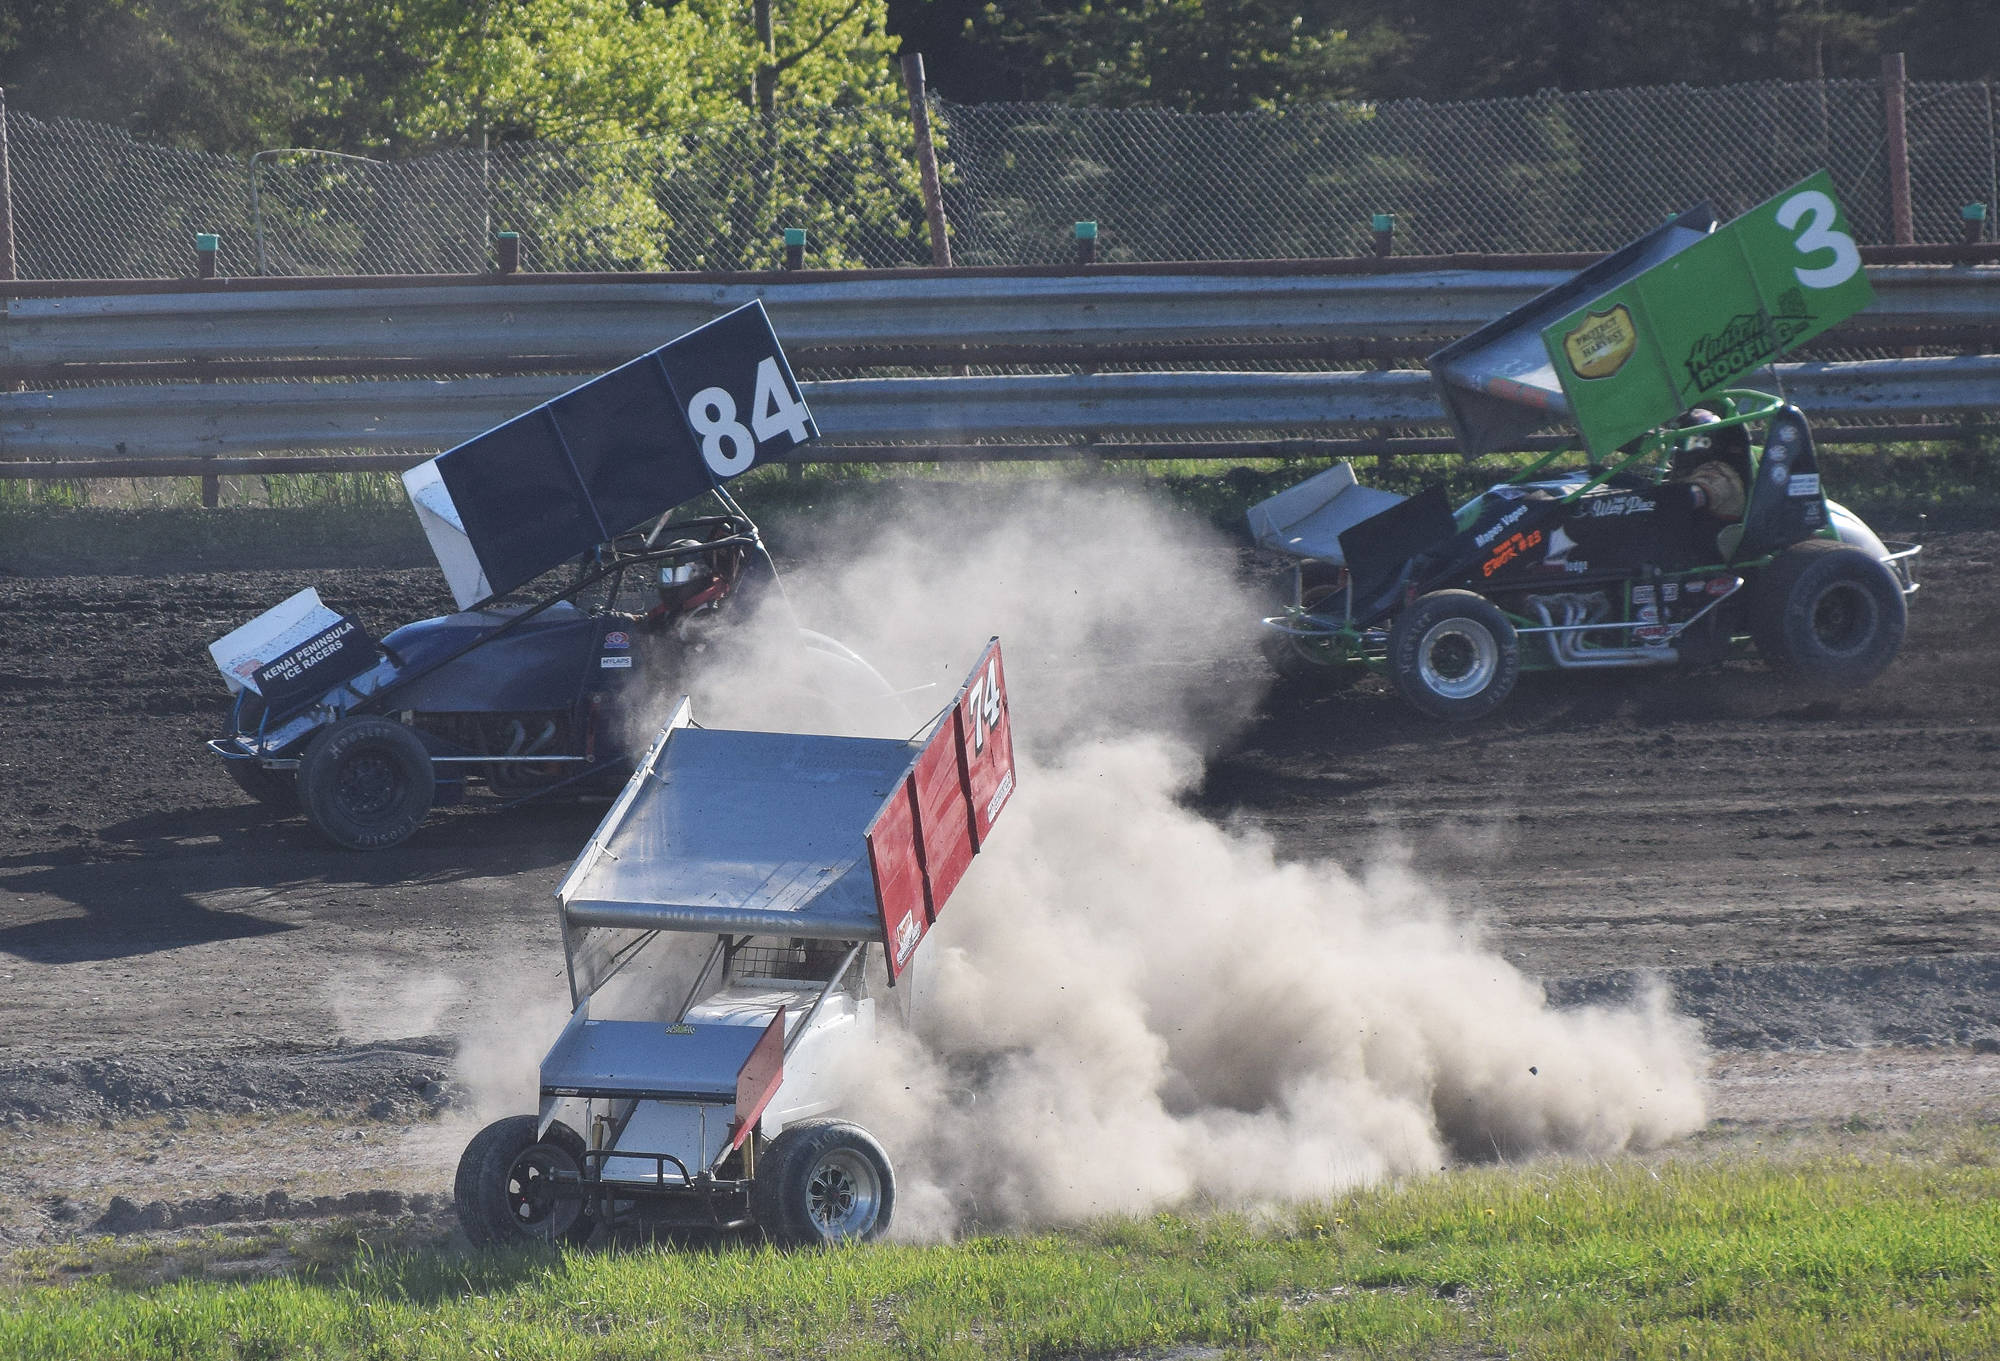 Elton McGahan goes off road in his sprint car as fellow racers Jimmie Hale (84) and Geoff Clark (3) make their way by Saturday night at Twin City Raceway in Kenai. (Photo by Joey Klecka/Peninsula Clarion)